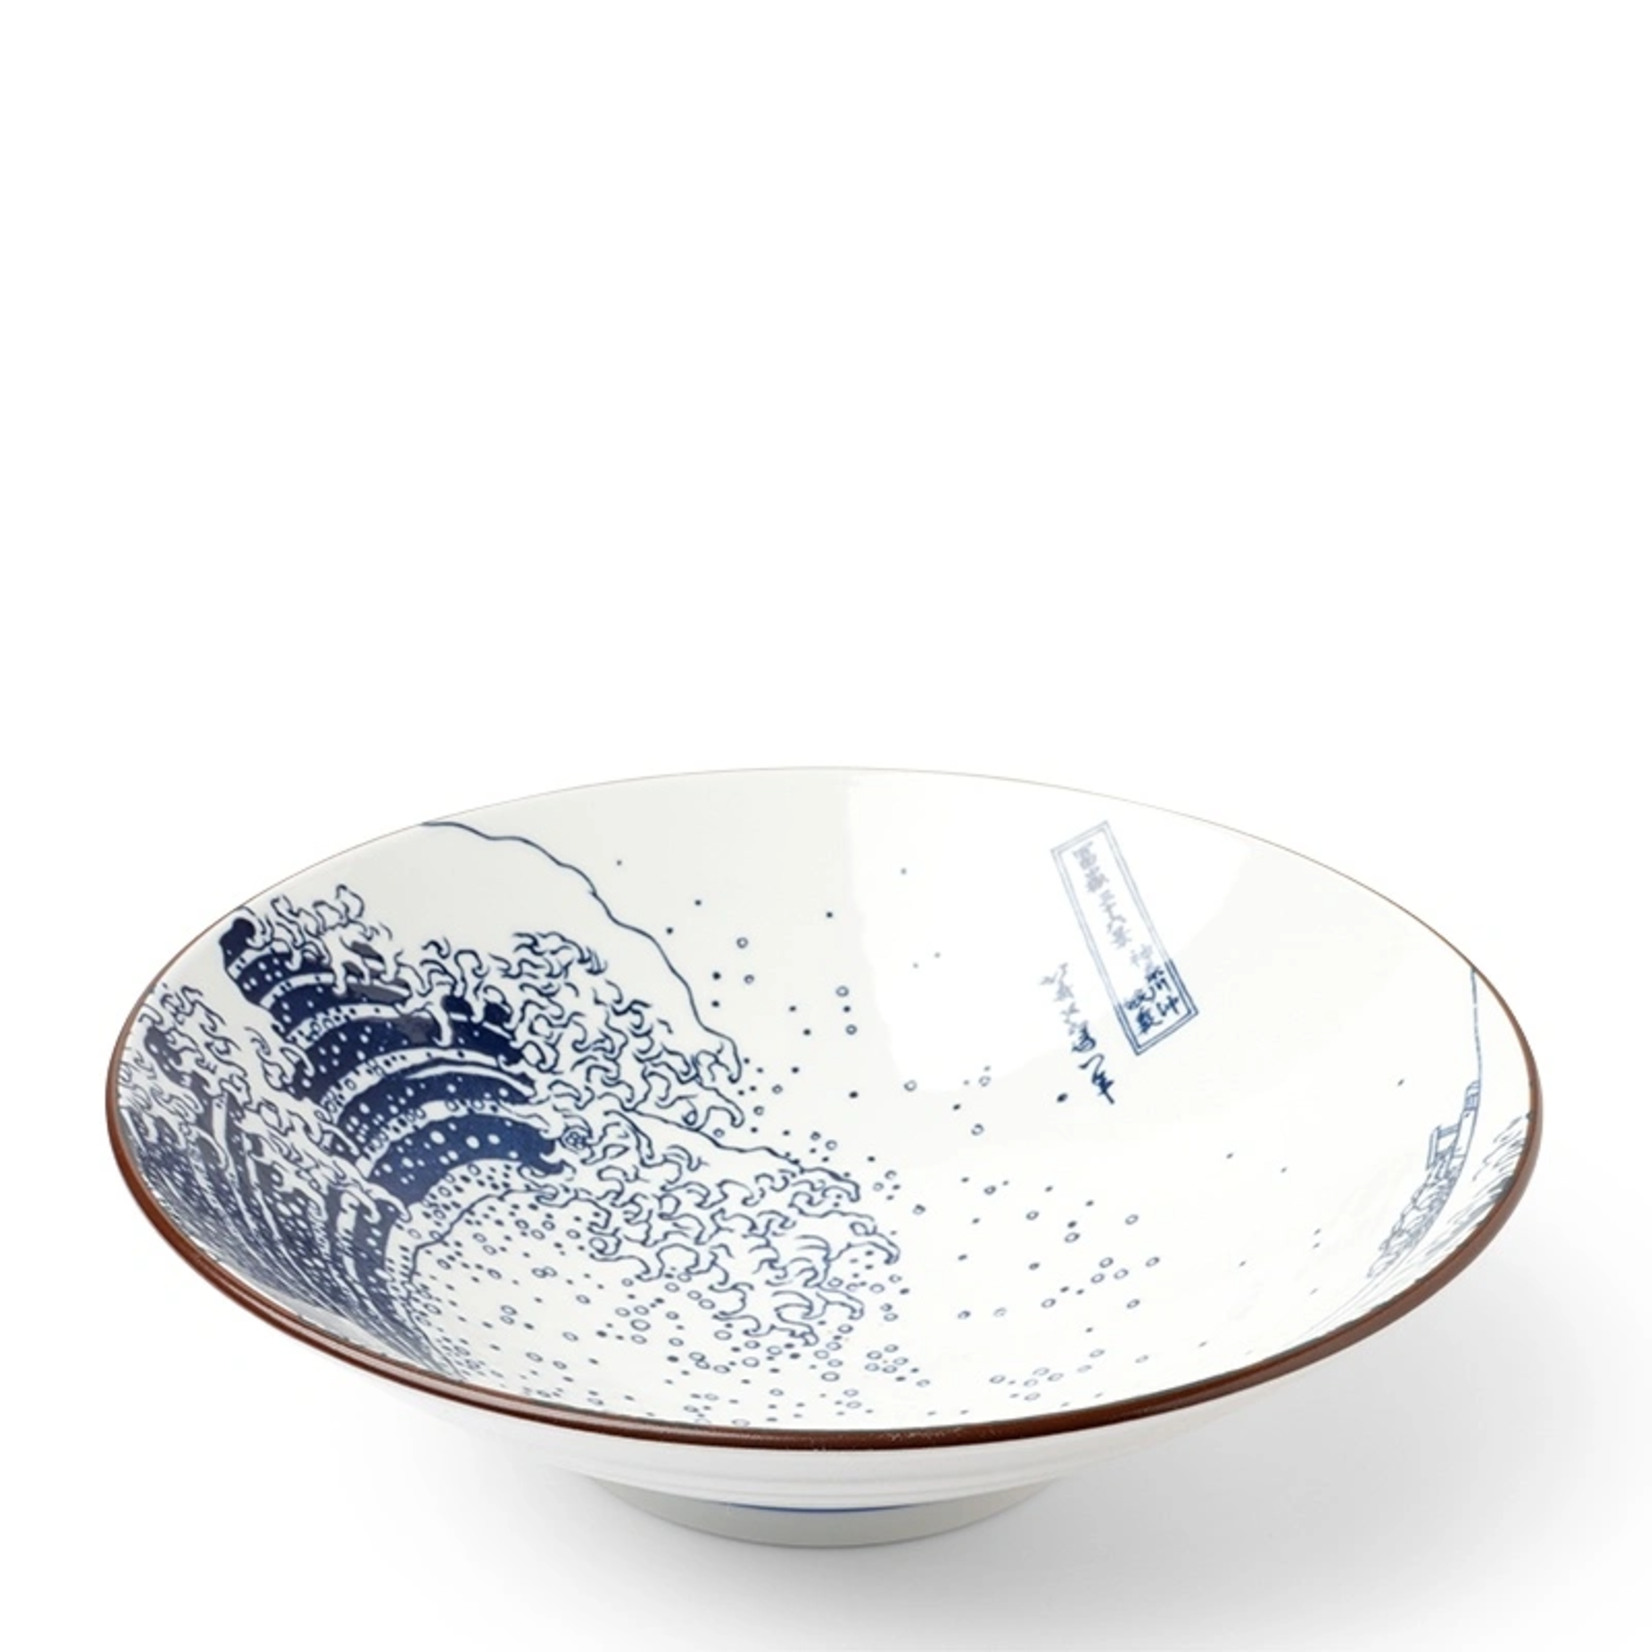 Bowl - 9.75"x2.75" The Great Wave - J6654